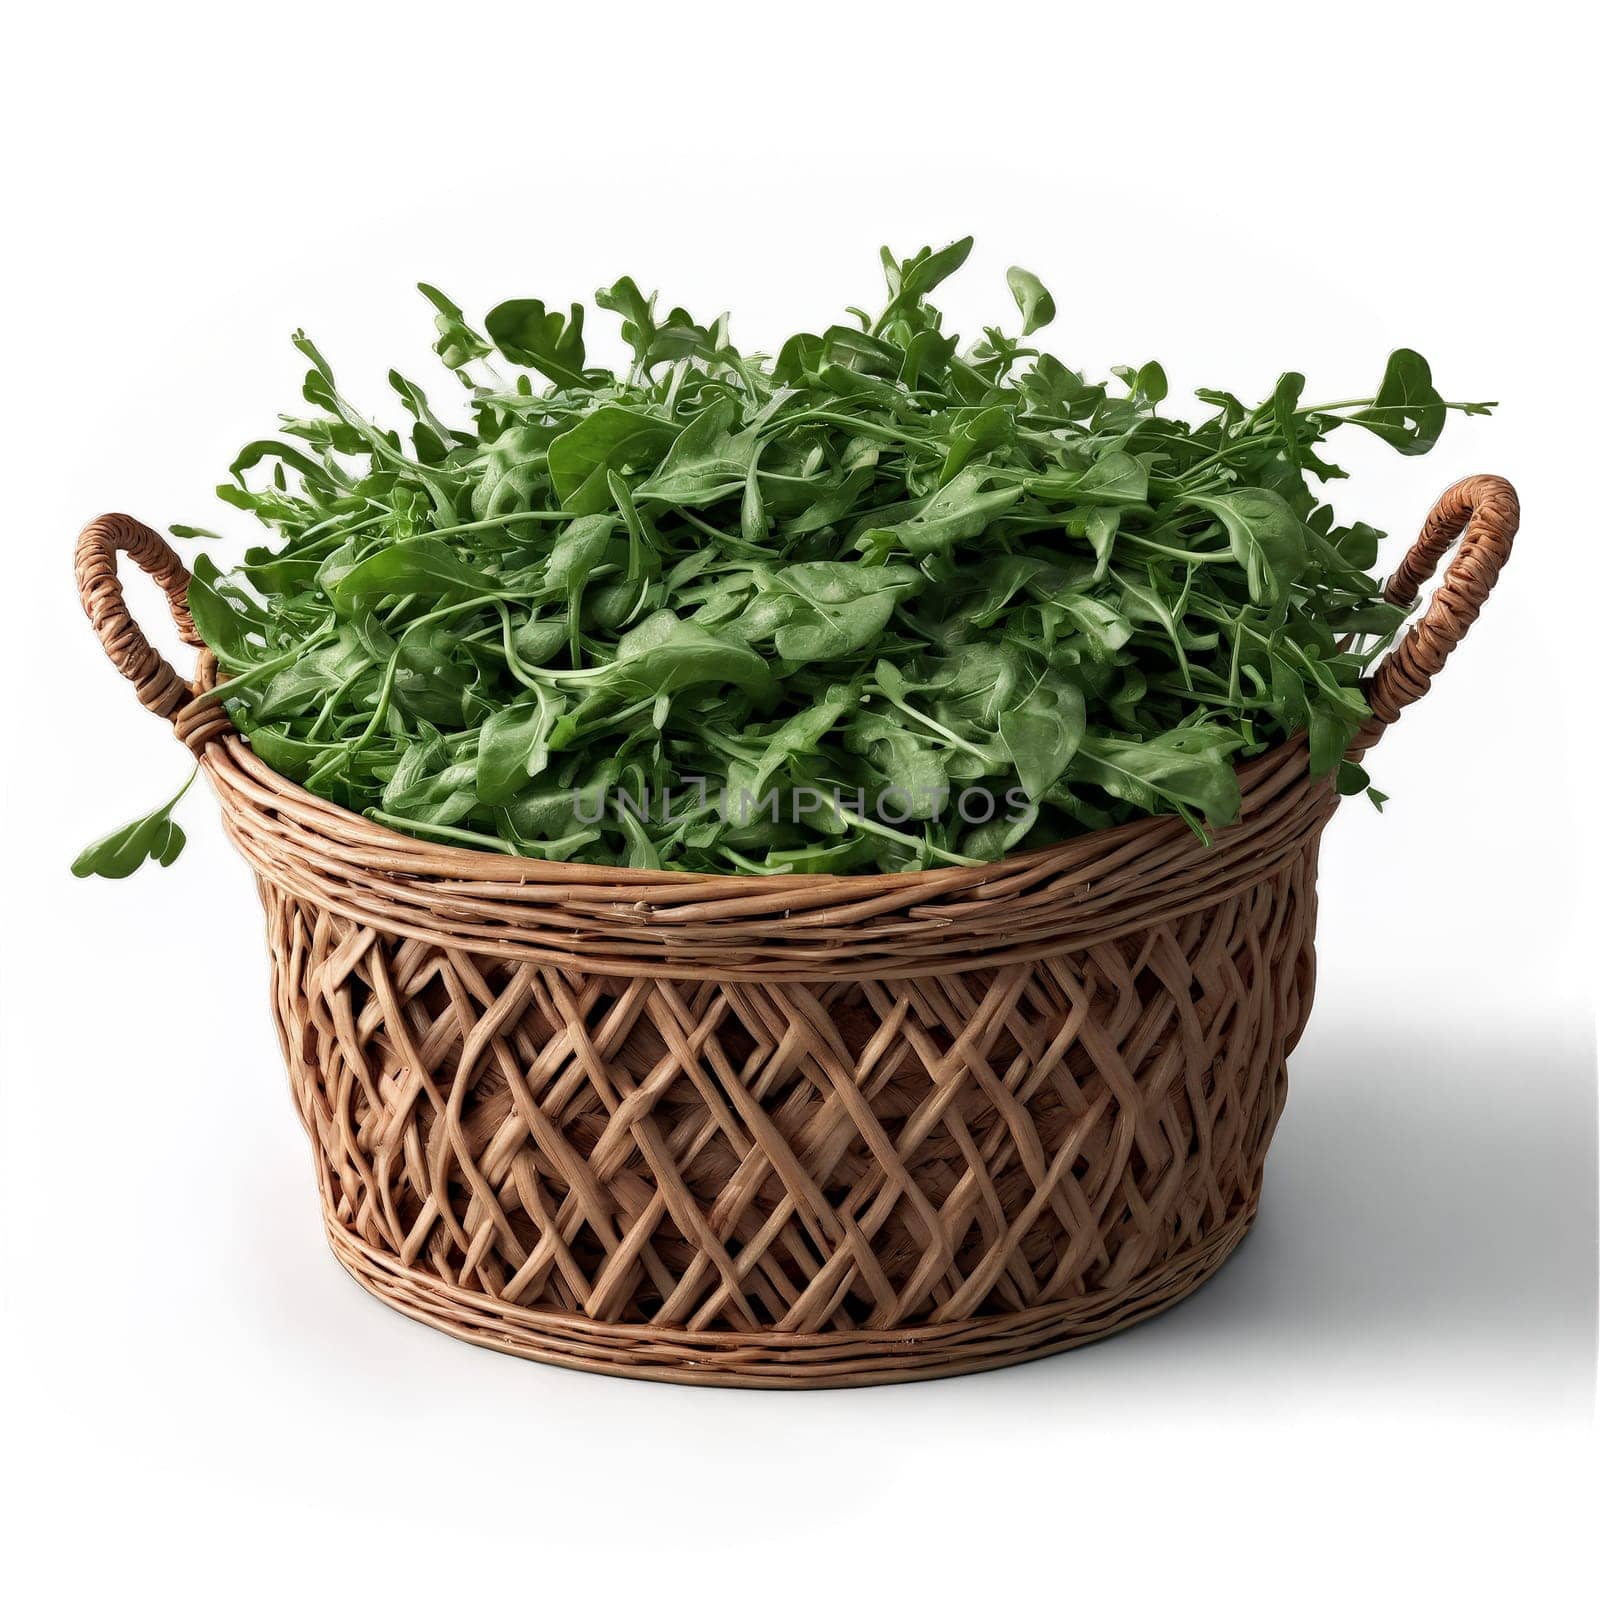 Arugula eruca sativa dark green leaves and bunches dancing over weathered wicker basket misty air. Food isolated on transparent background.